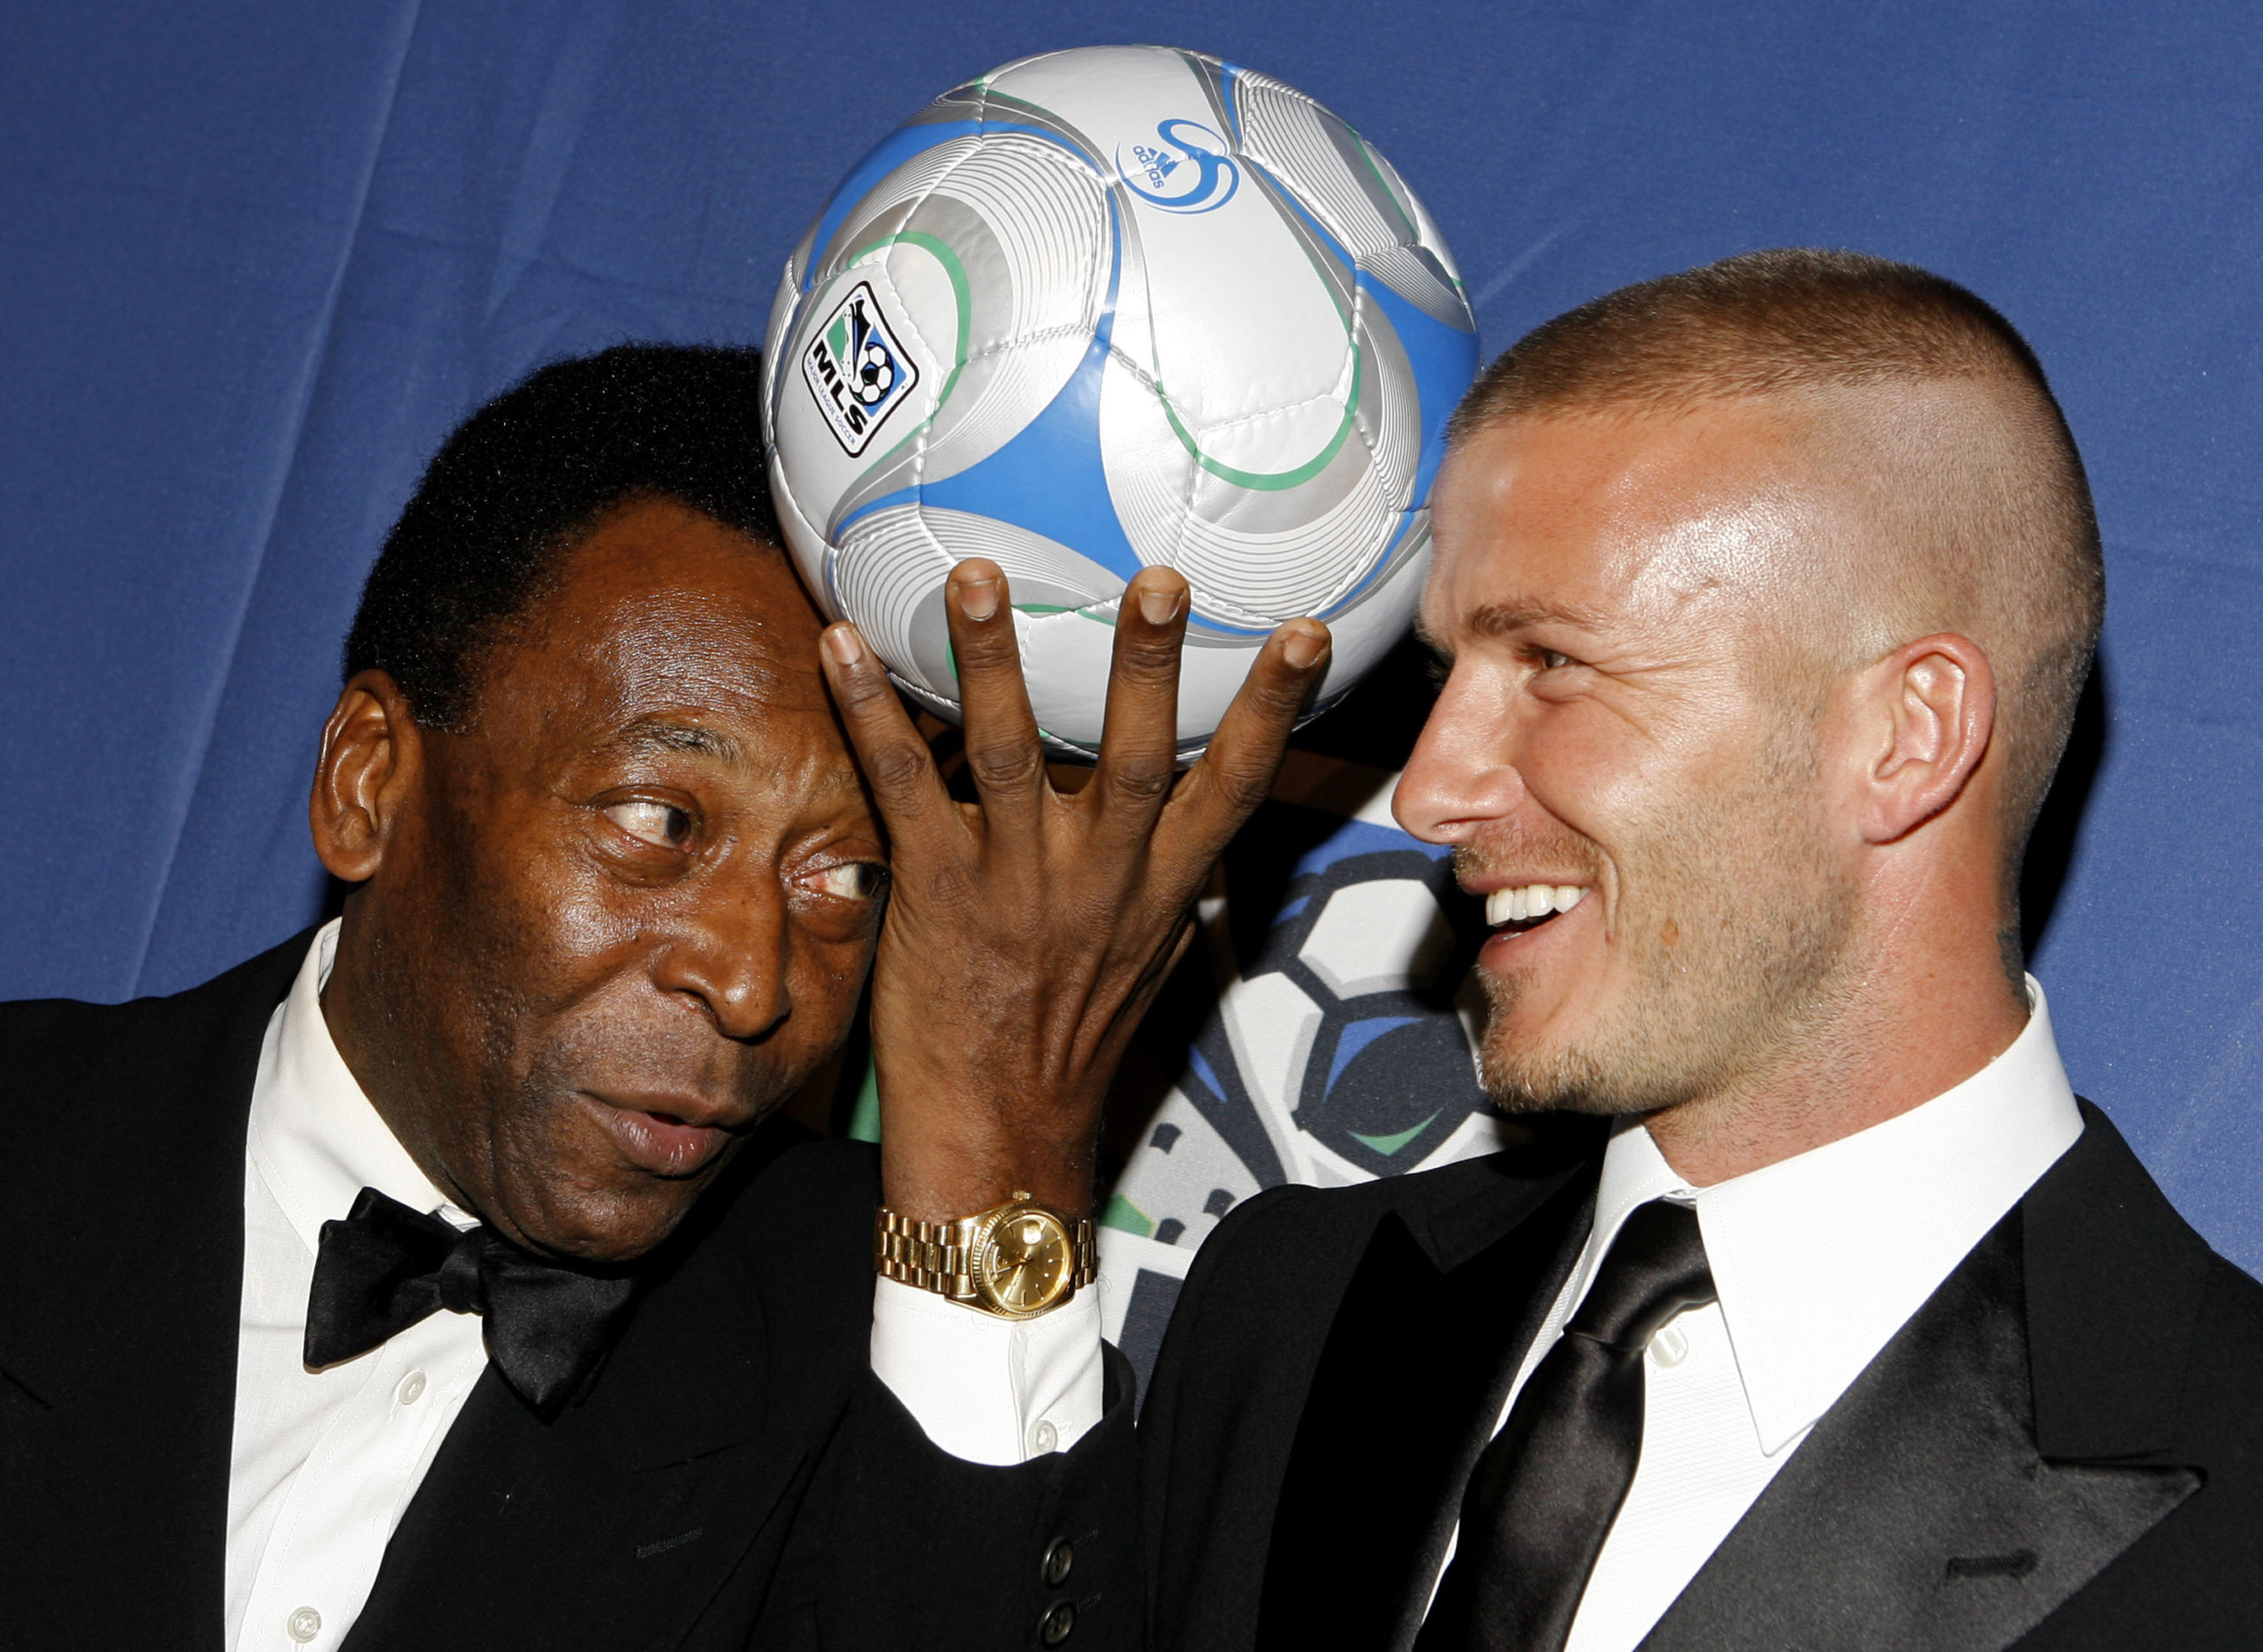 Pelé and English soccer star David Beckham pose for photos during a U.S. Soccer Foundation fundraising gala, in New York, March 19, 2008